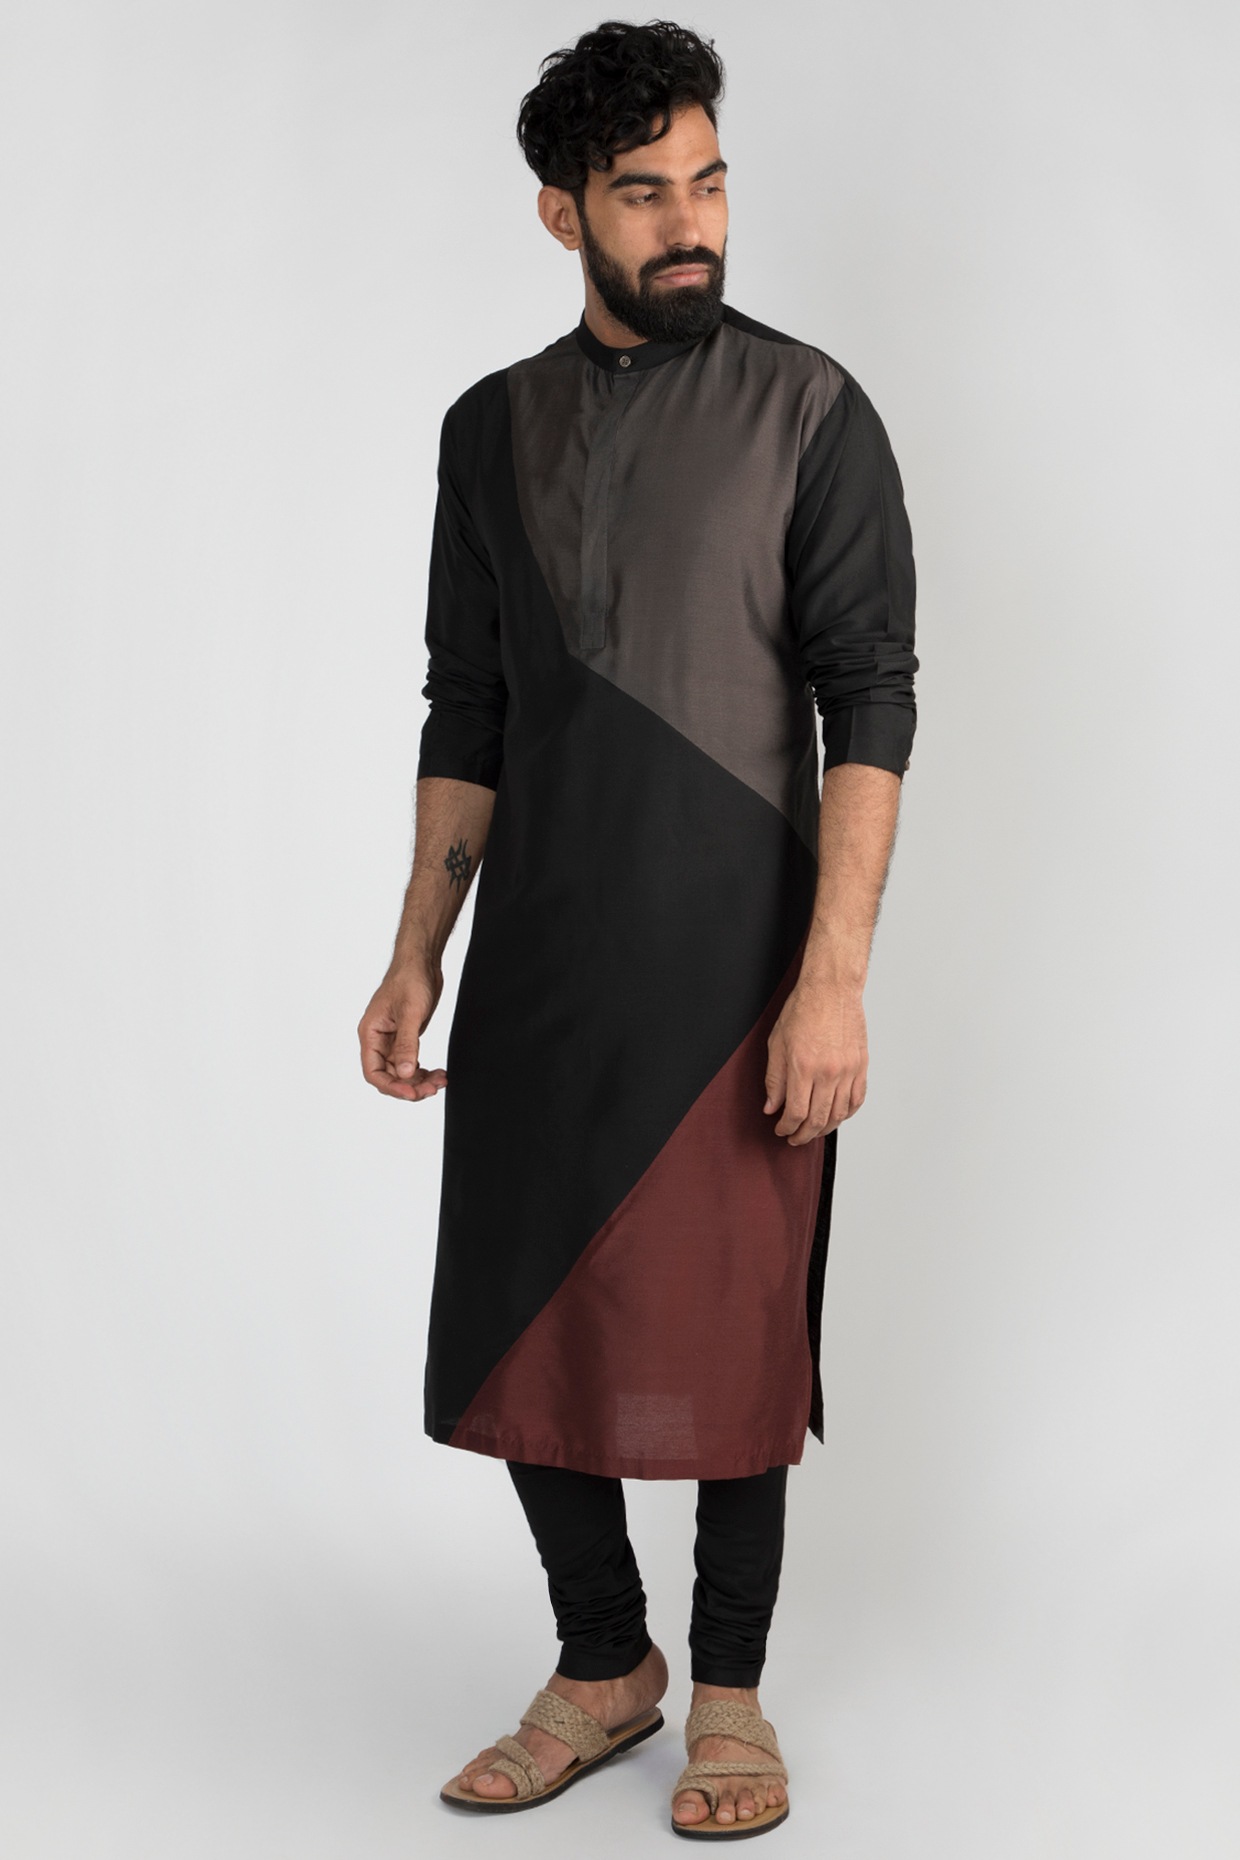 8 New Men's Black Kurta Designs To Style In Different Occasions